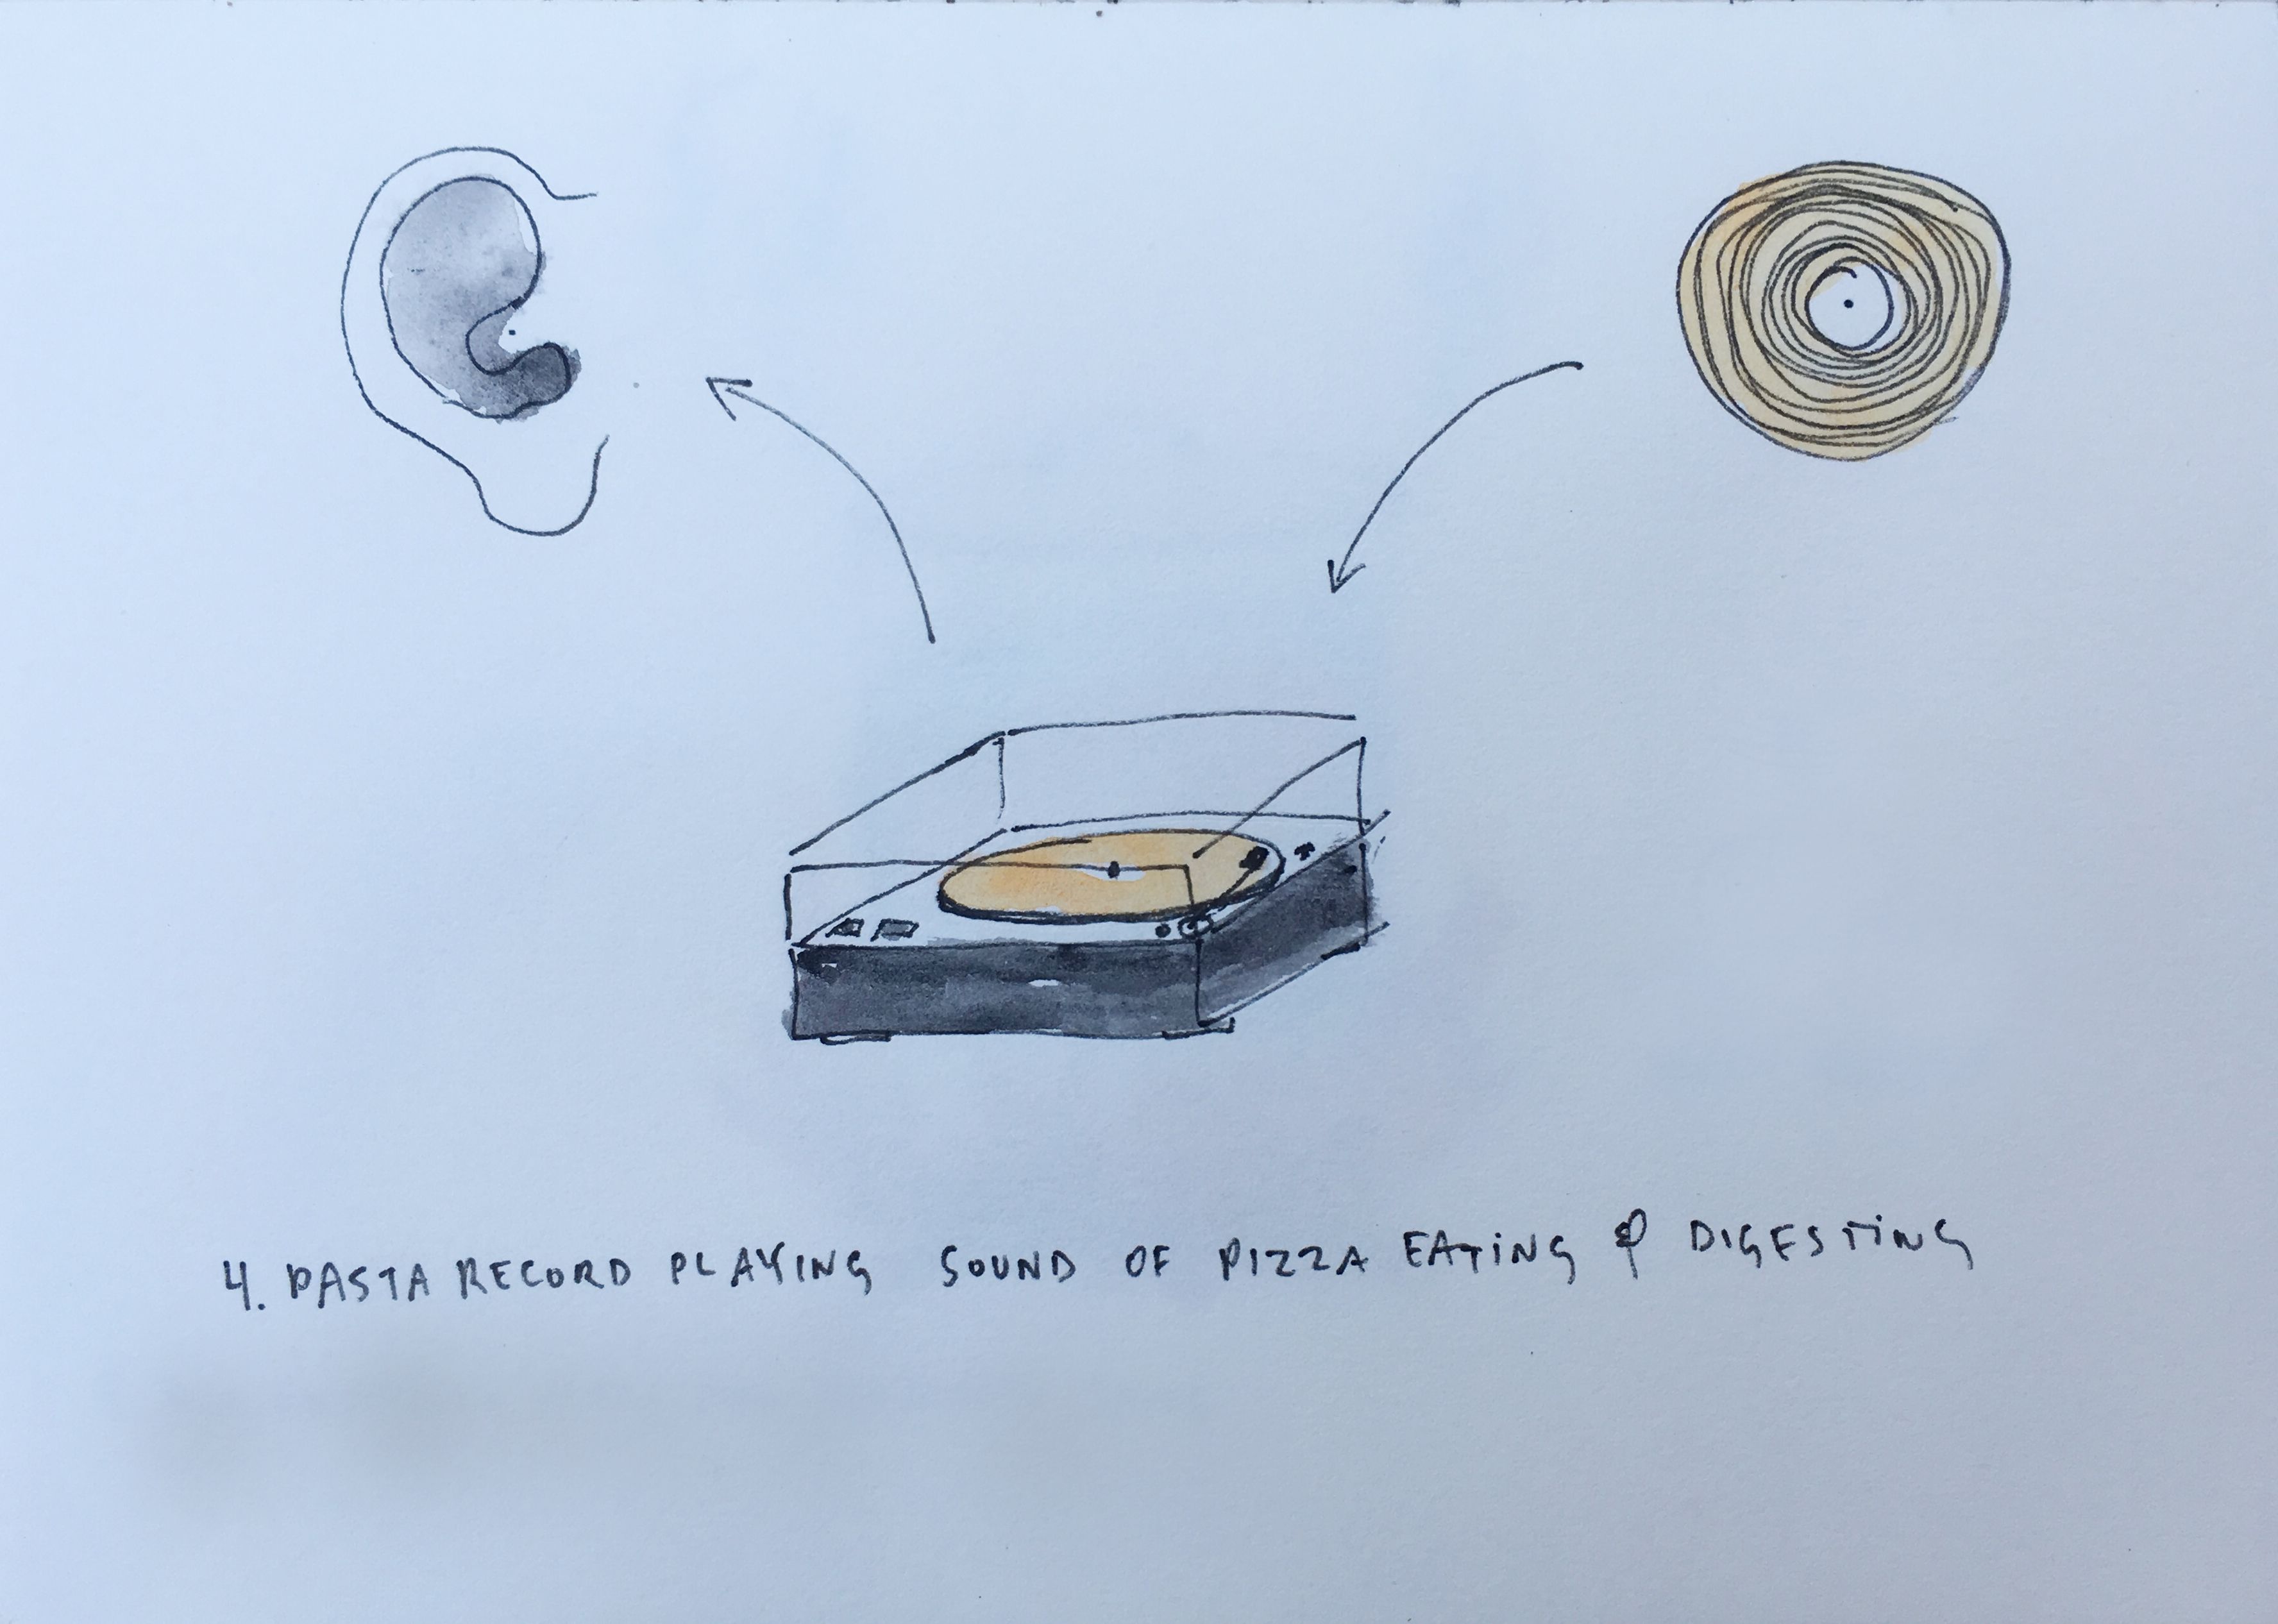 Concept color drawing of pasta record playing sound of pizza eating and digesting for PPKK 05.00 by Sarah Ancelle Schoenfeld and Louis-Philippe Scoufaras